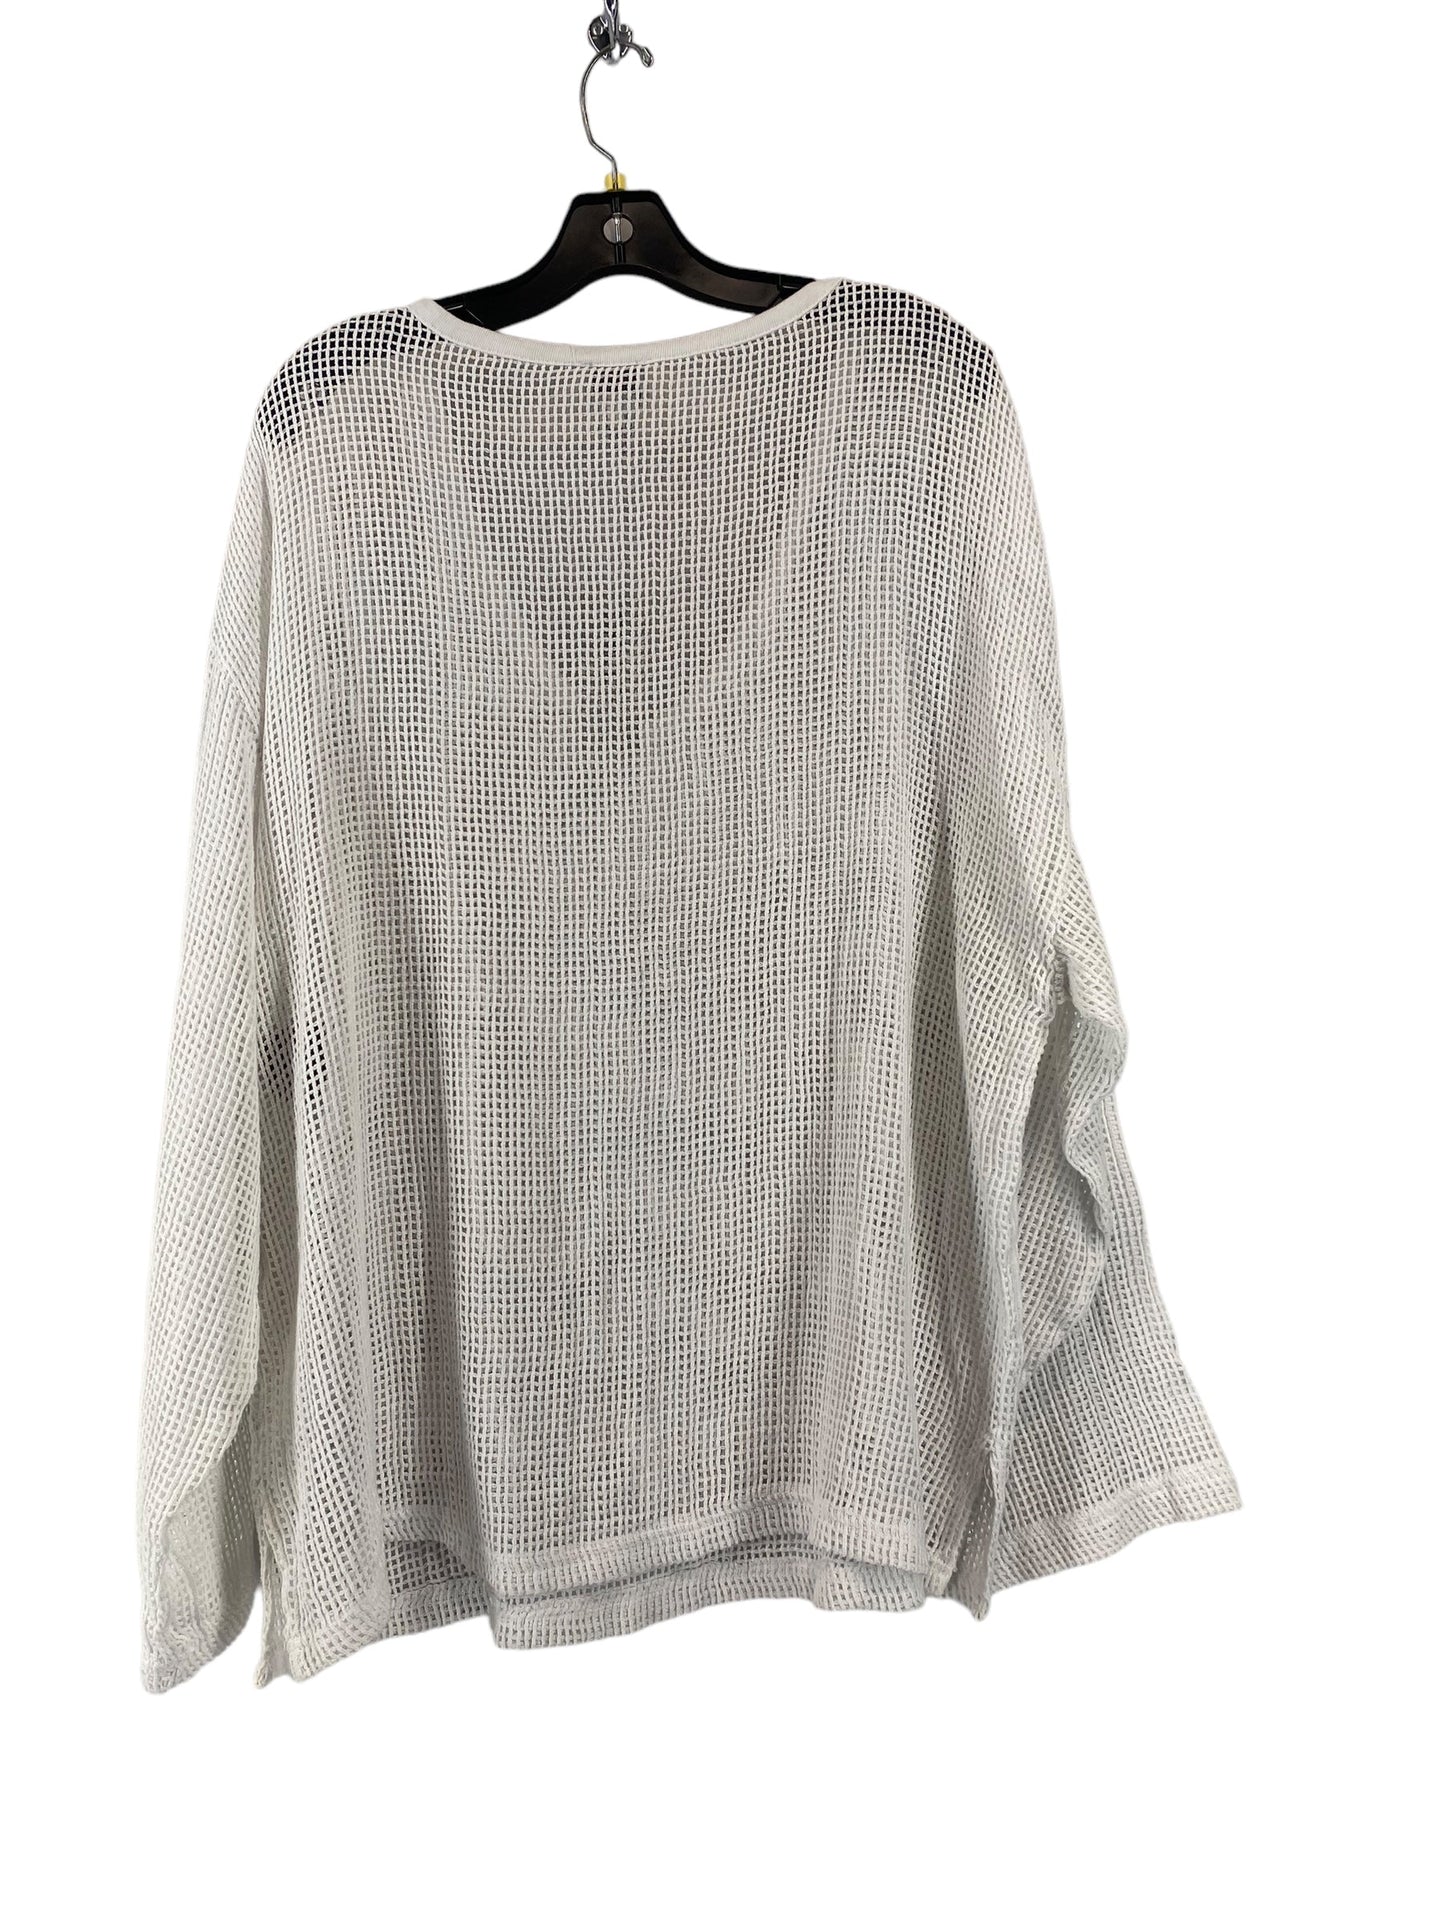 White Top Long Sleeve Chicos, Size 3